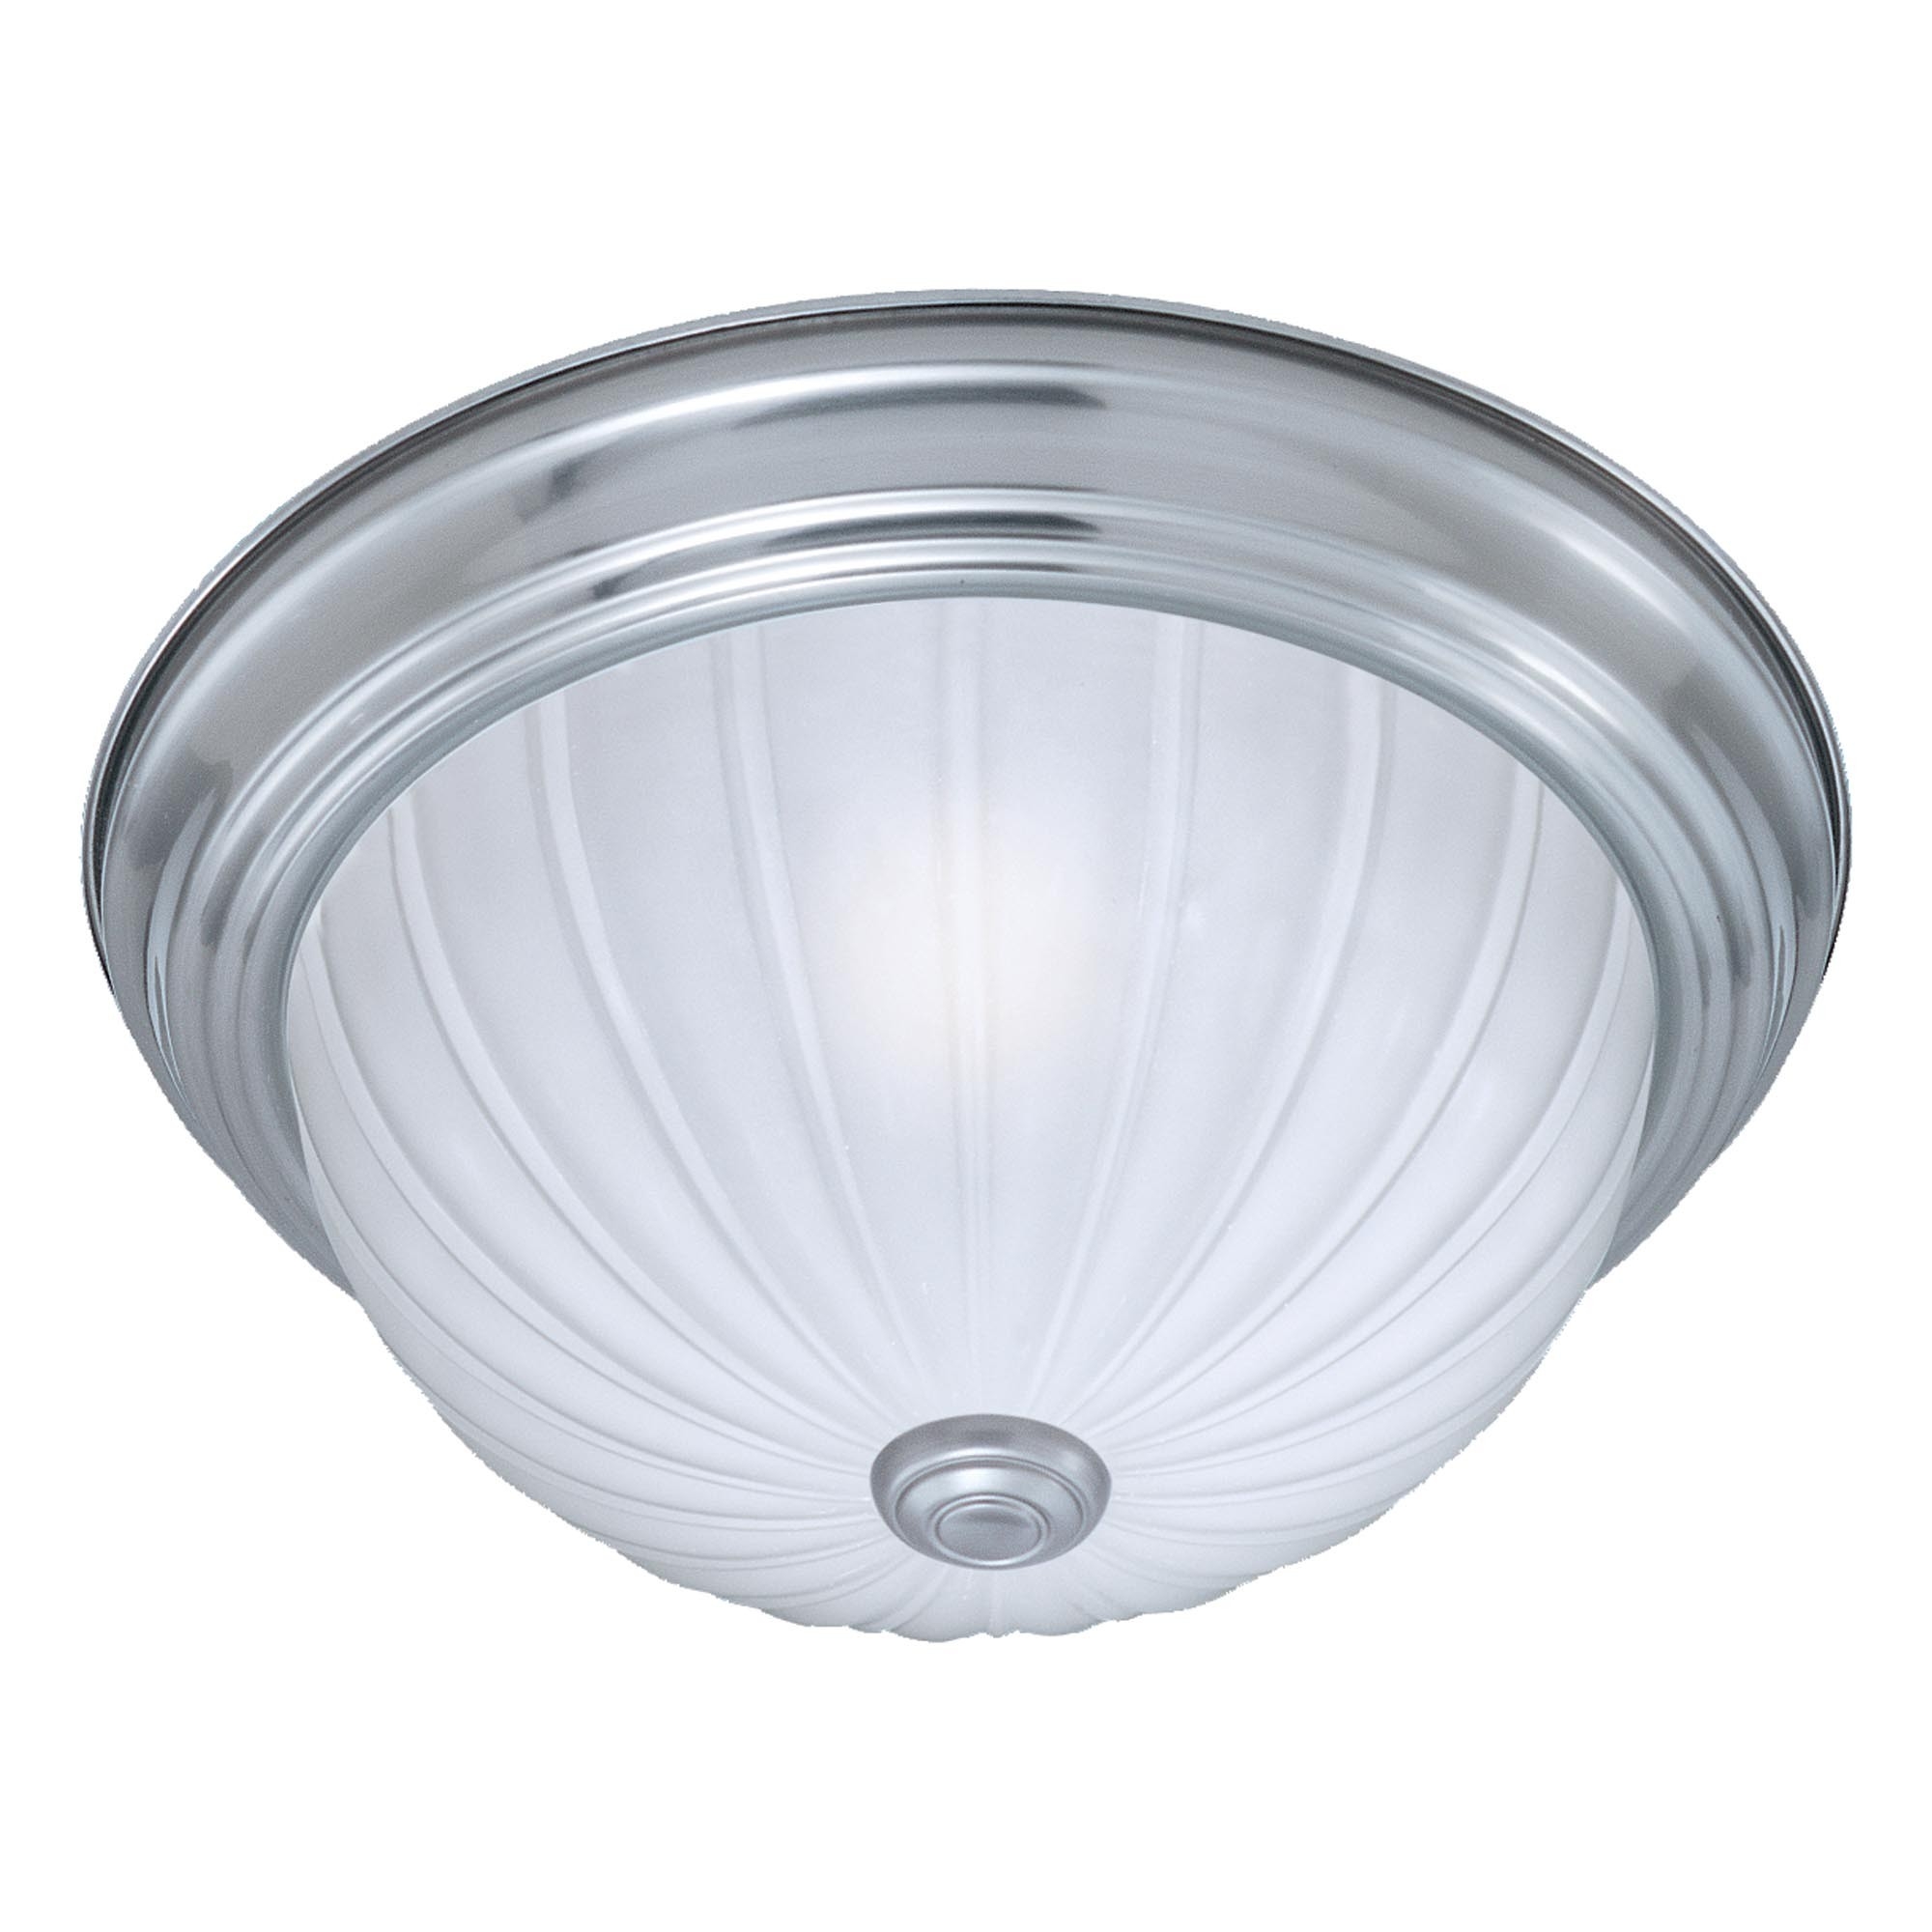 Permalink to Types Of Ceiling Light Fixture